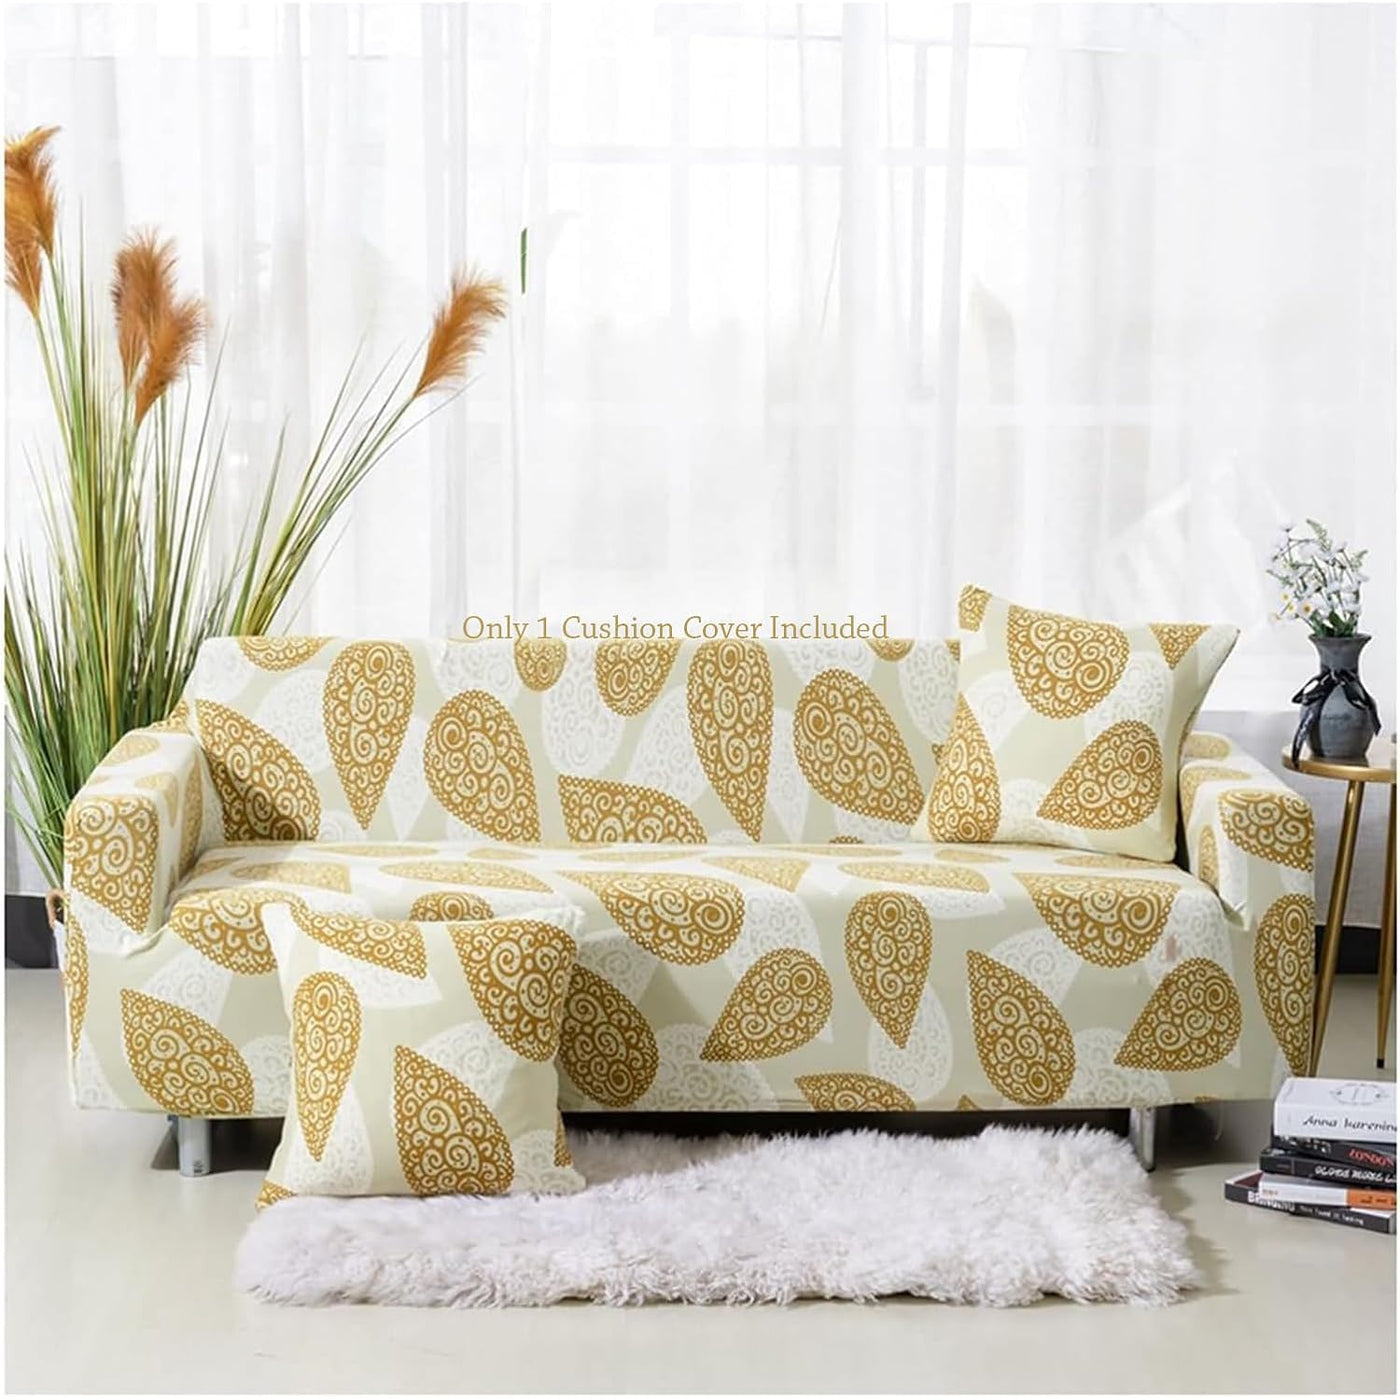 Universal Stretchable Sofa Cover-Gold Paisley